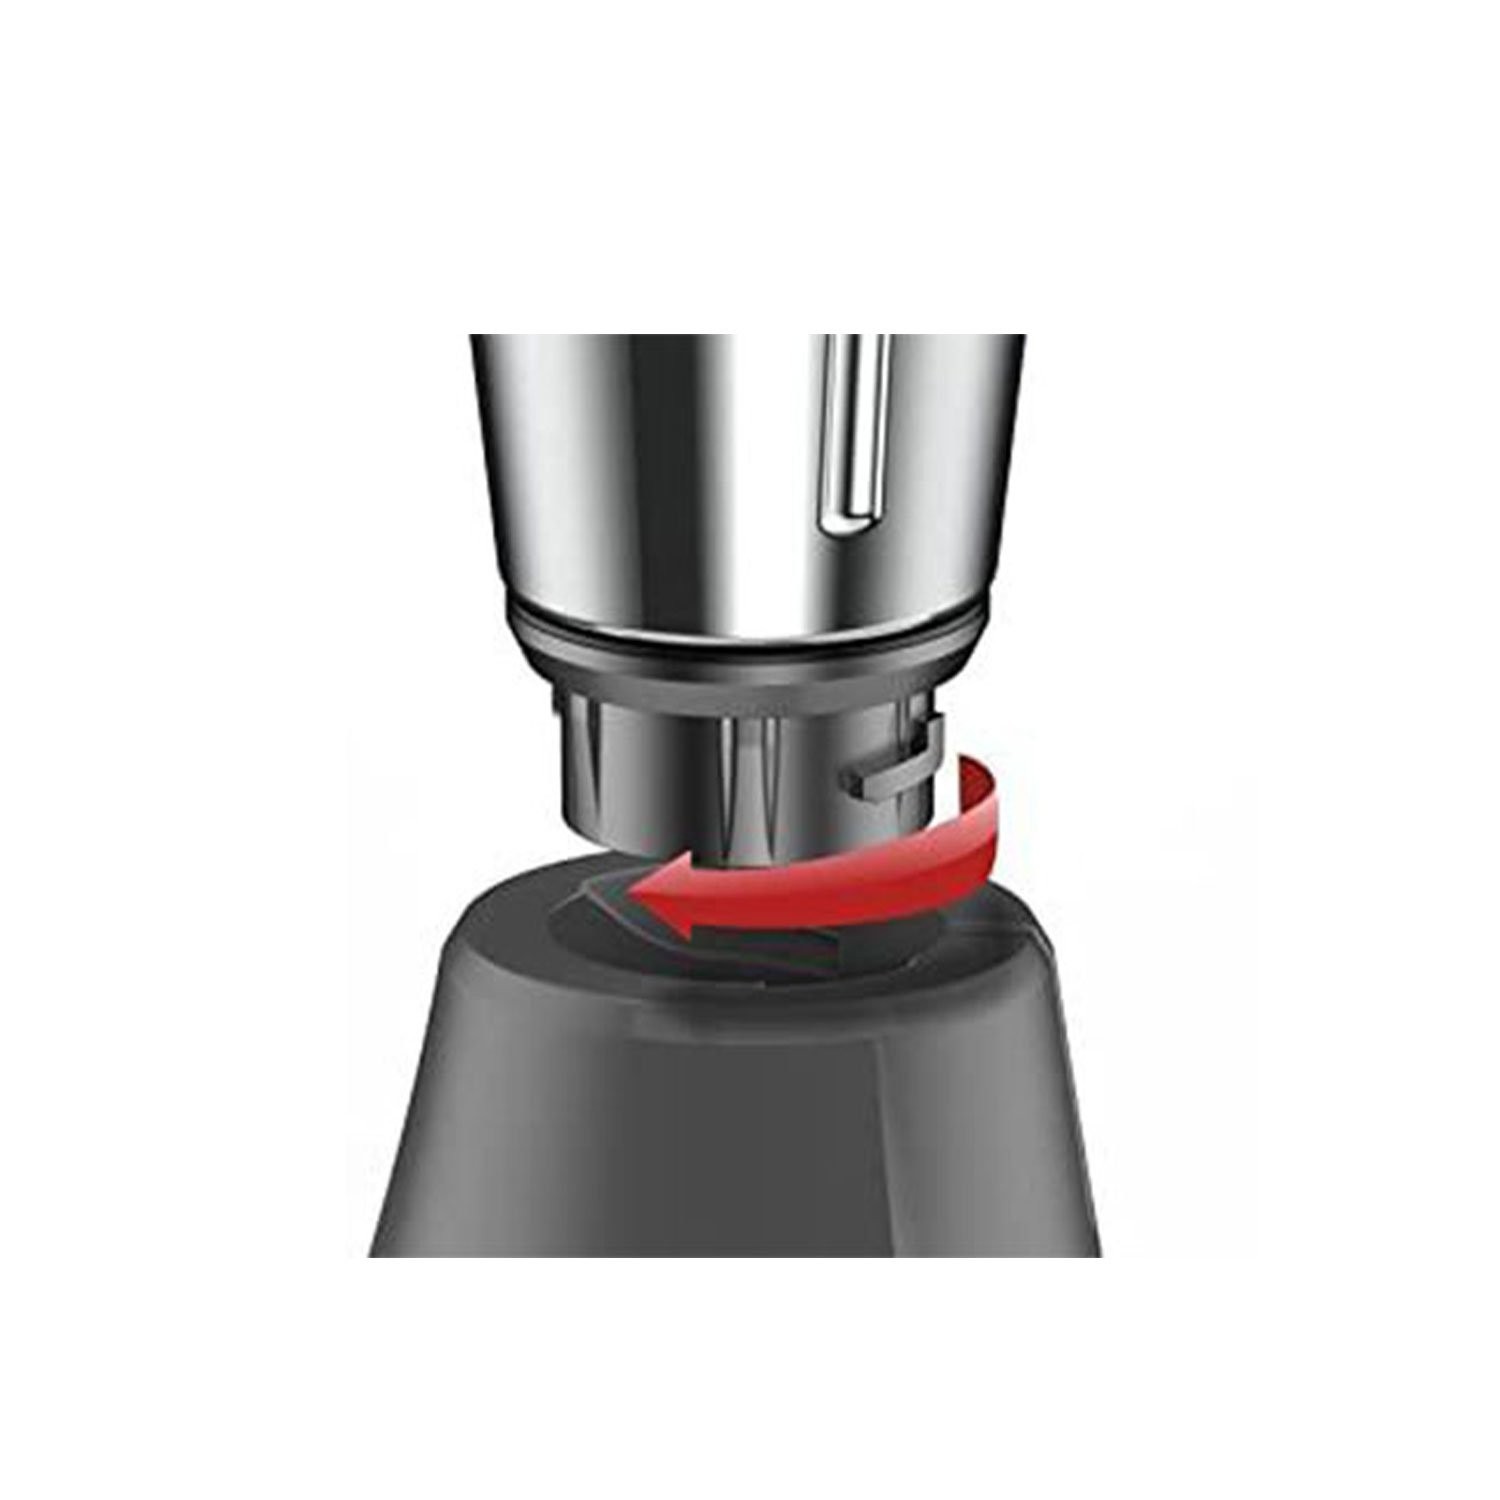 vidiem-eva-nero-650w-stainless-steel-jars-indian-mixer-grinder-spice-coffee-grinder-110v-for-use-in-canada-usa7